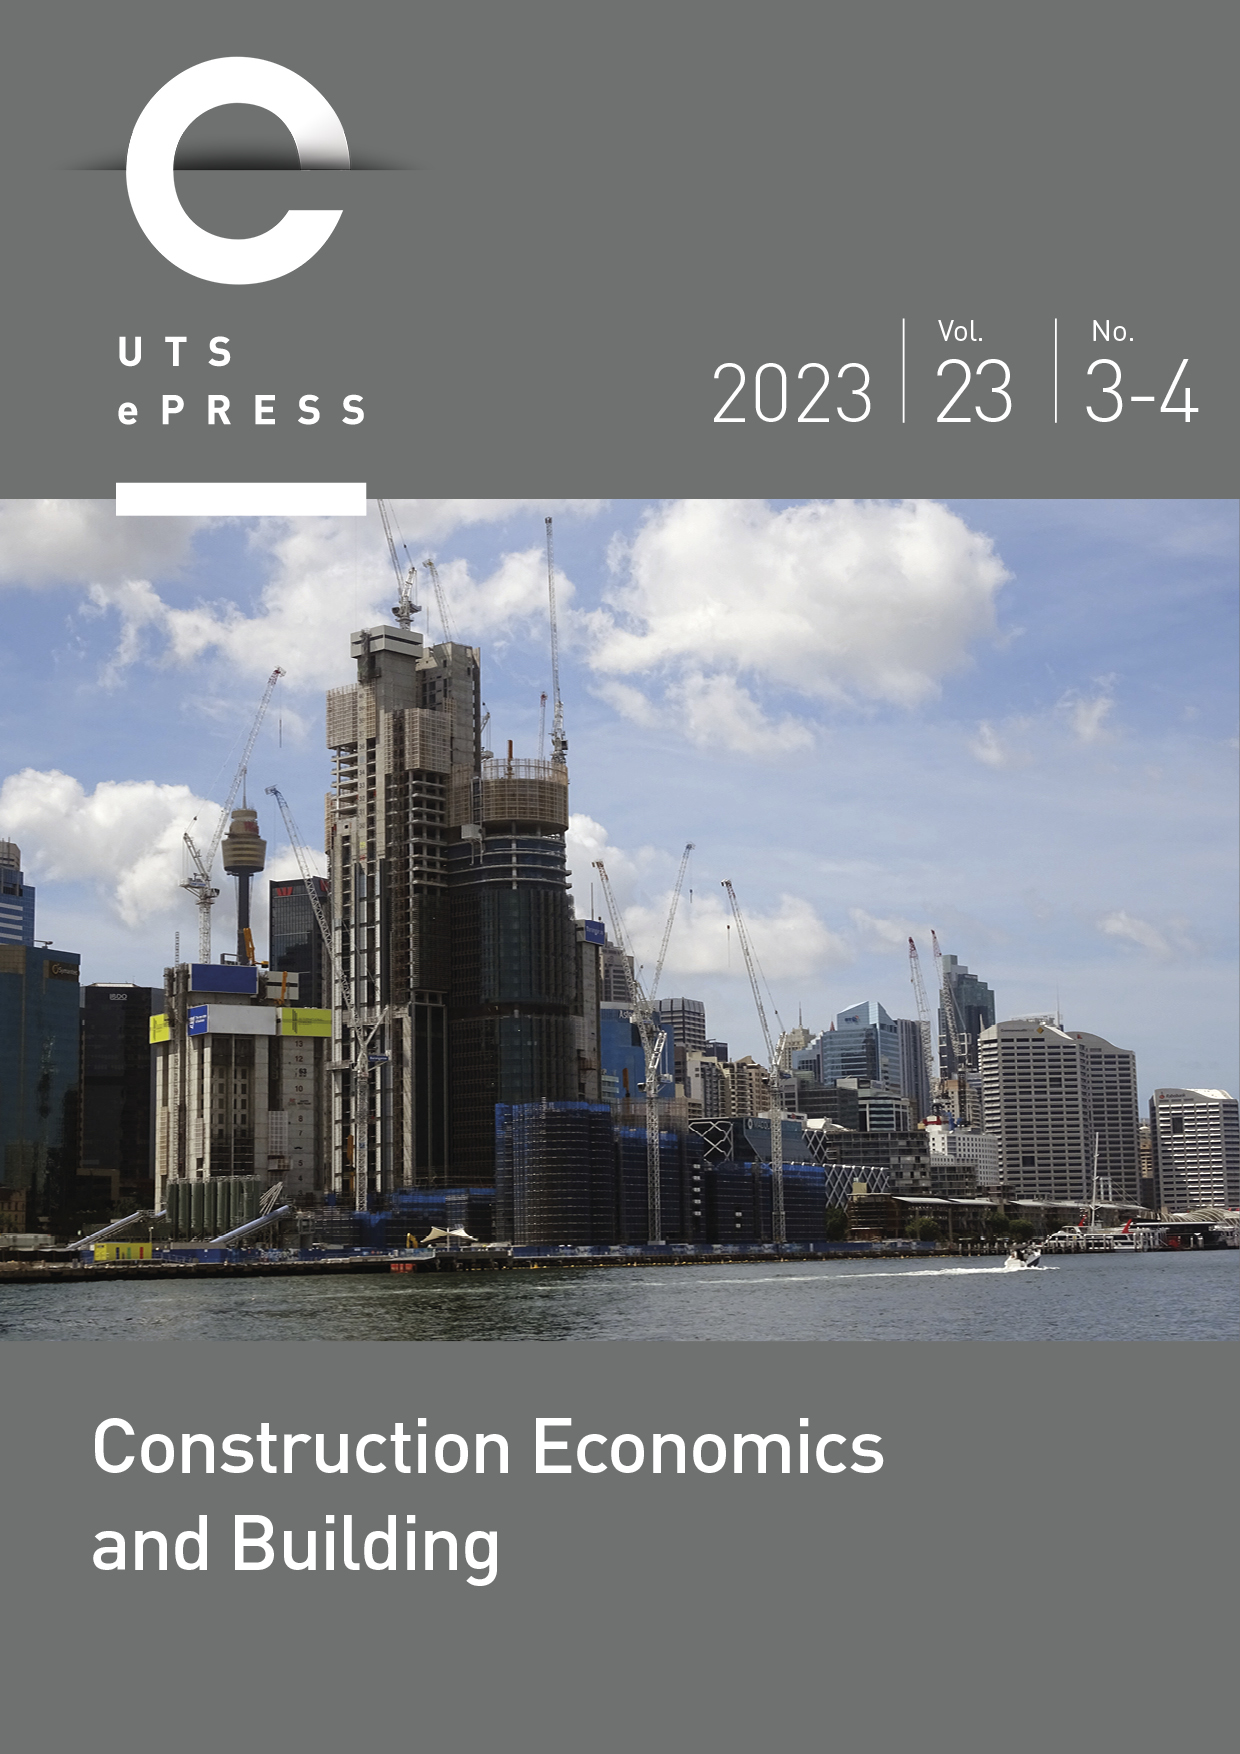 "Construction Economics and Building" 2022 Volume 22 Number 1 cover